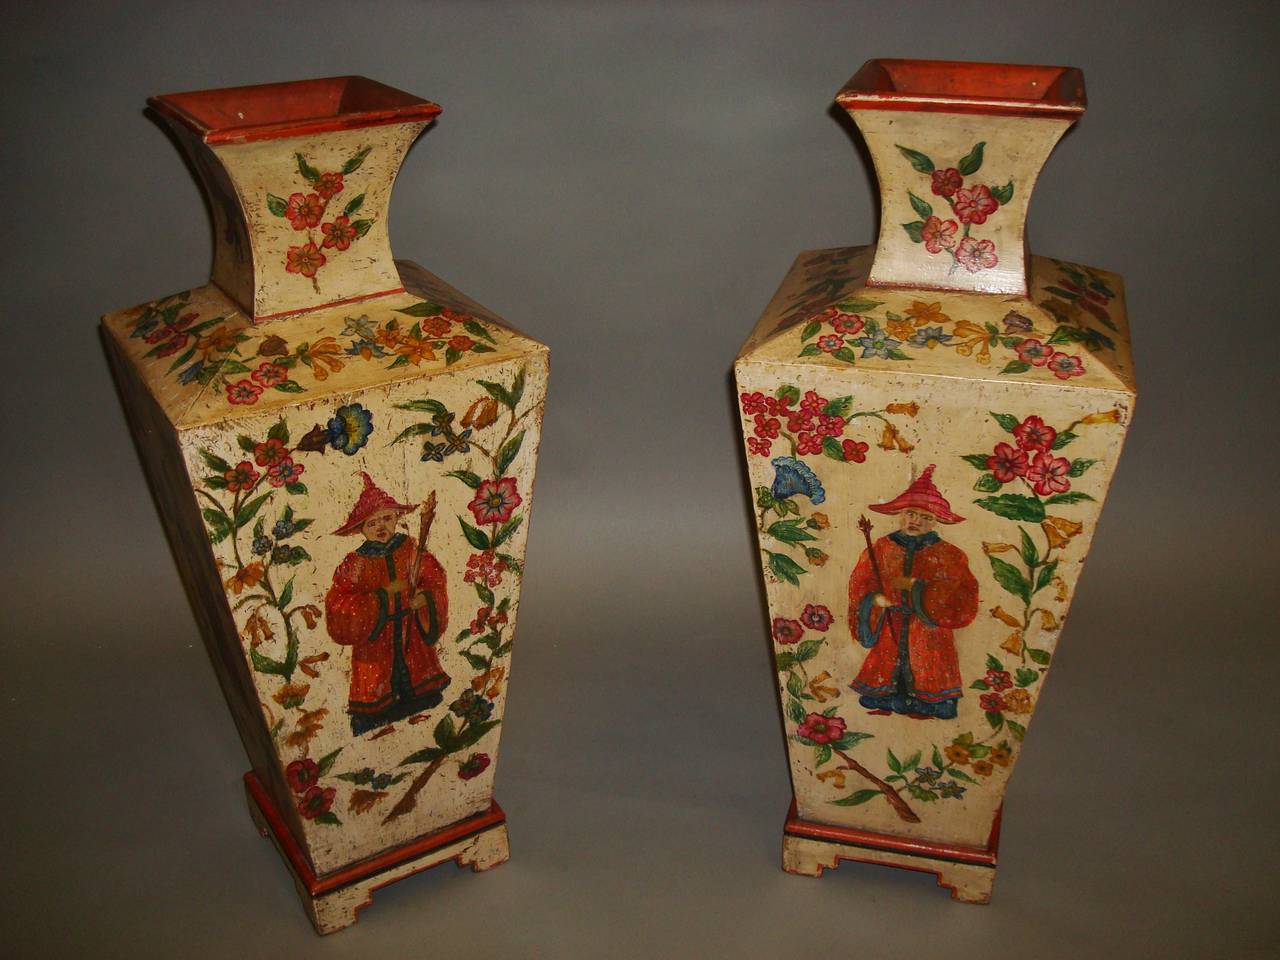 20th Century Early 20th century Decorative Pair of Large Painted Pine Vases For Sale